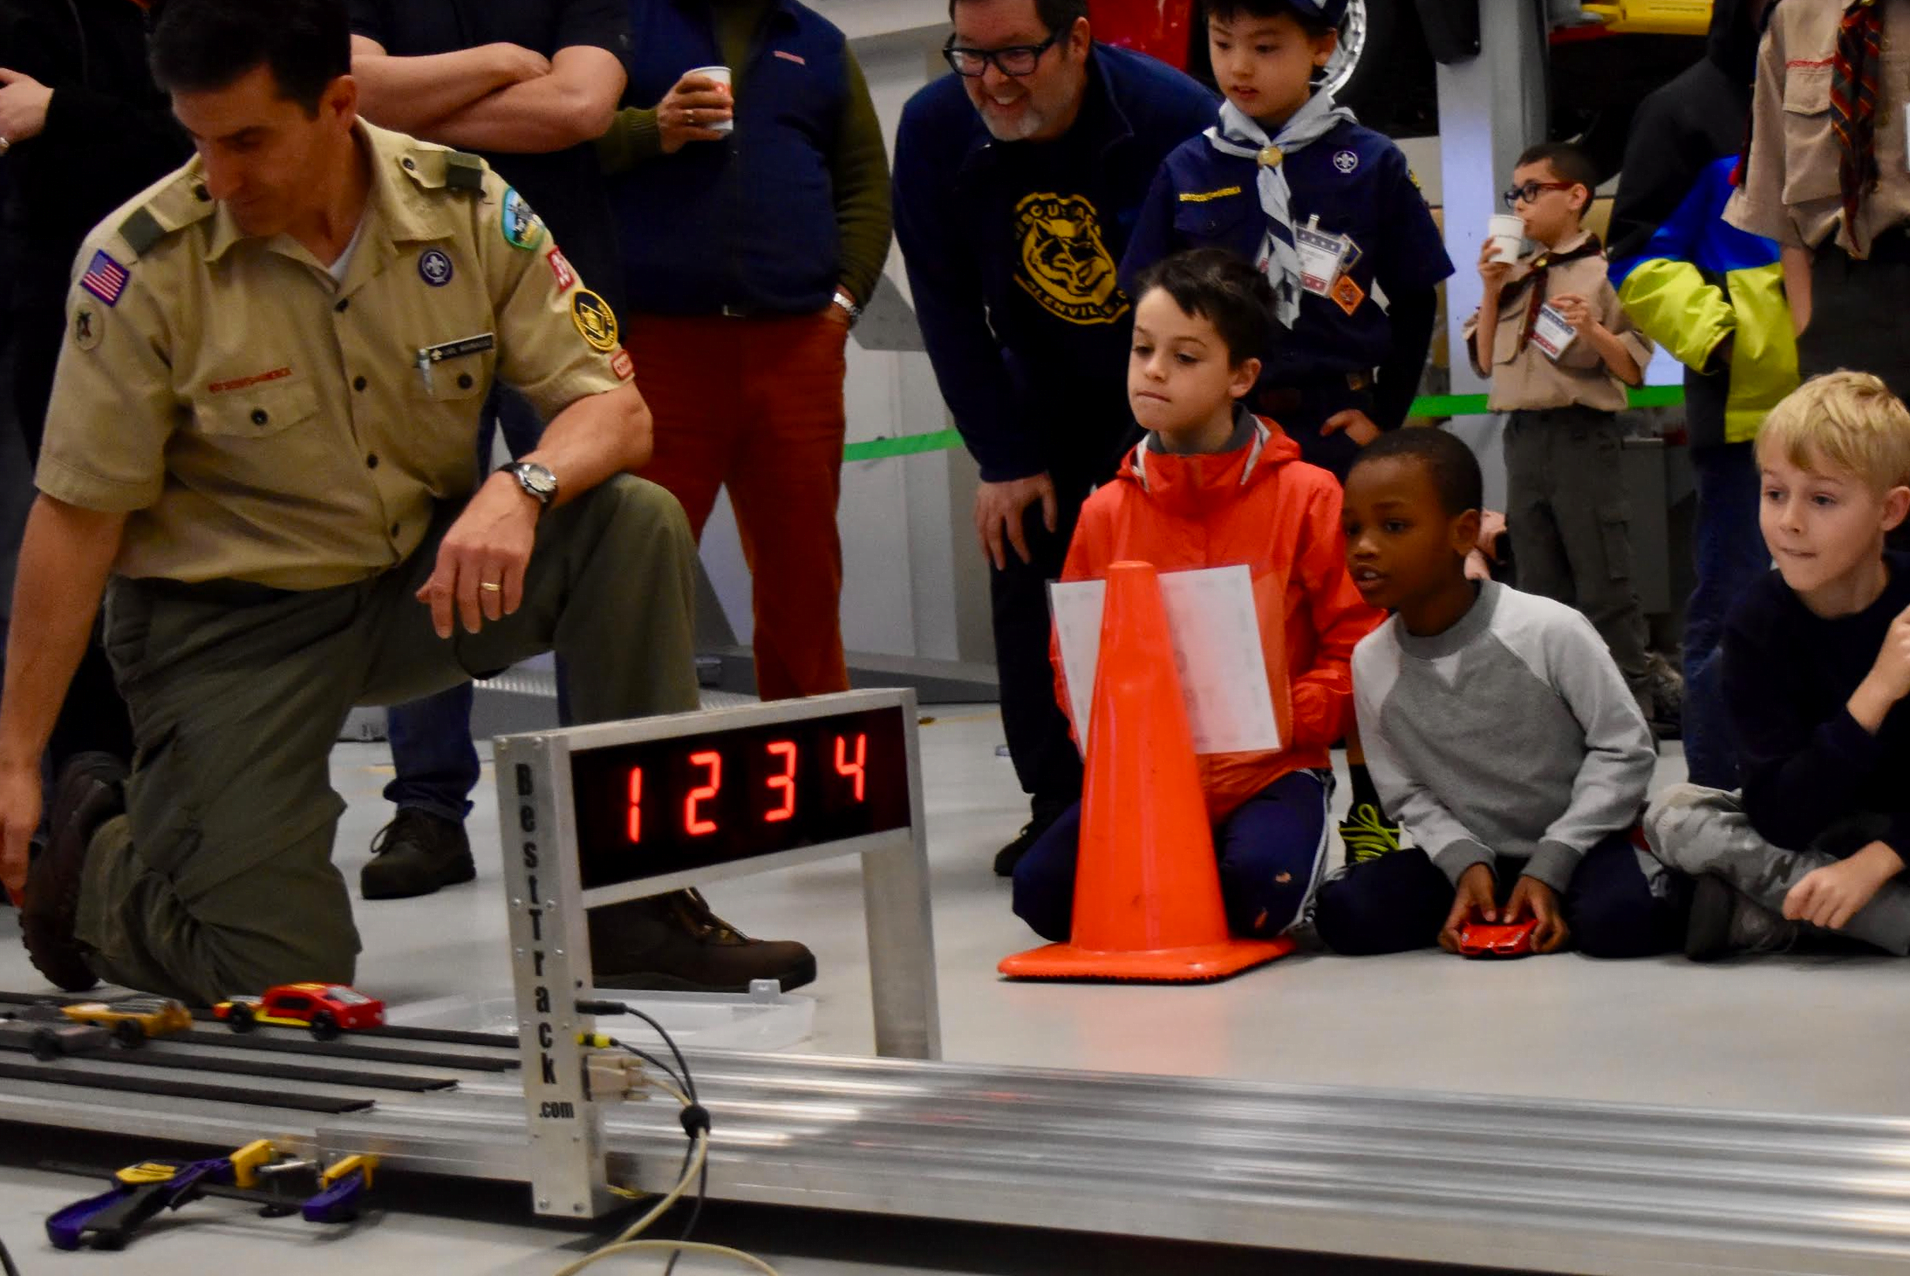  Cub Scouts and their parents watch the finish line at the 2019 Pinewood Derby Championship at Miller Motorcars. Adults will have their chance to race on March 7th at the Pinewood Derby Social.